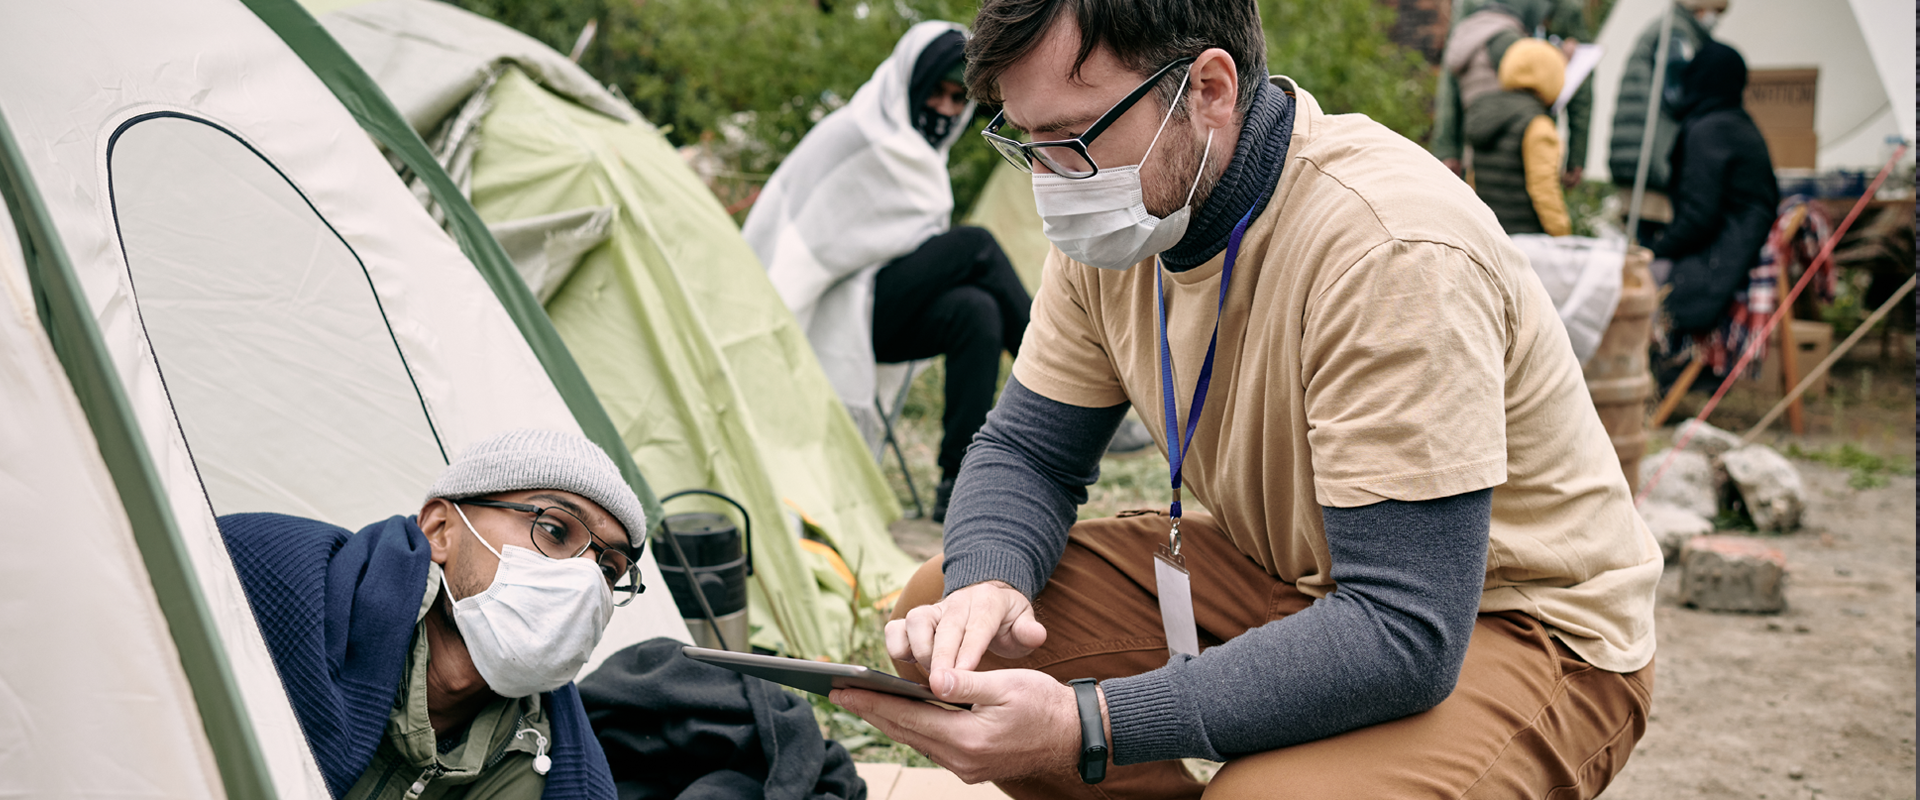 Photo illustrating the International Crisis Response Association's focus, a team of workers are shown sitting around a campsite with someone in the foreground consulting a tablet.